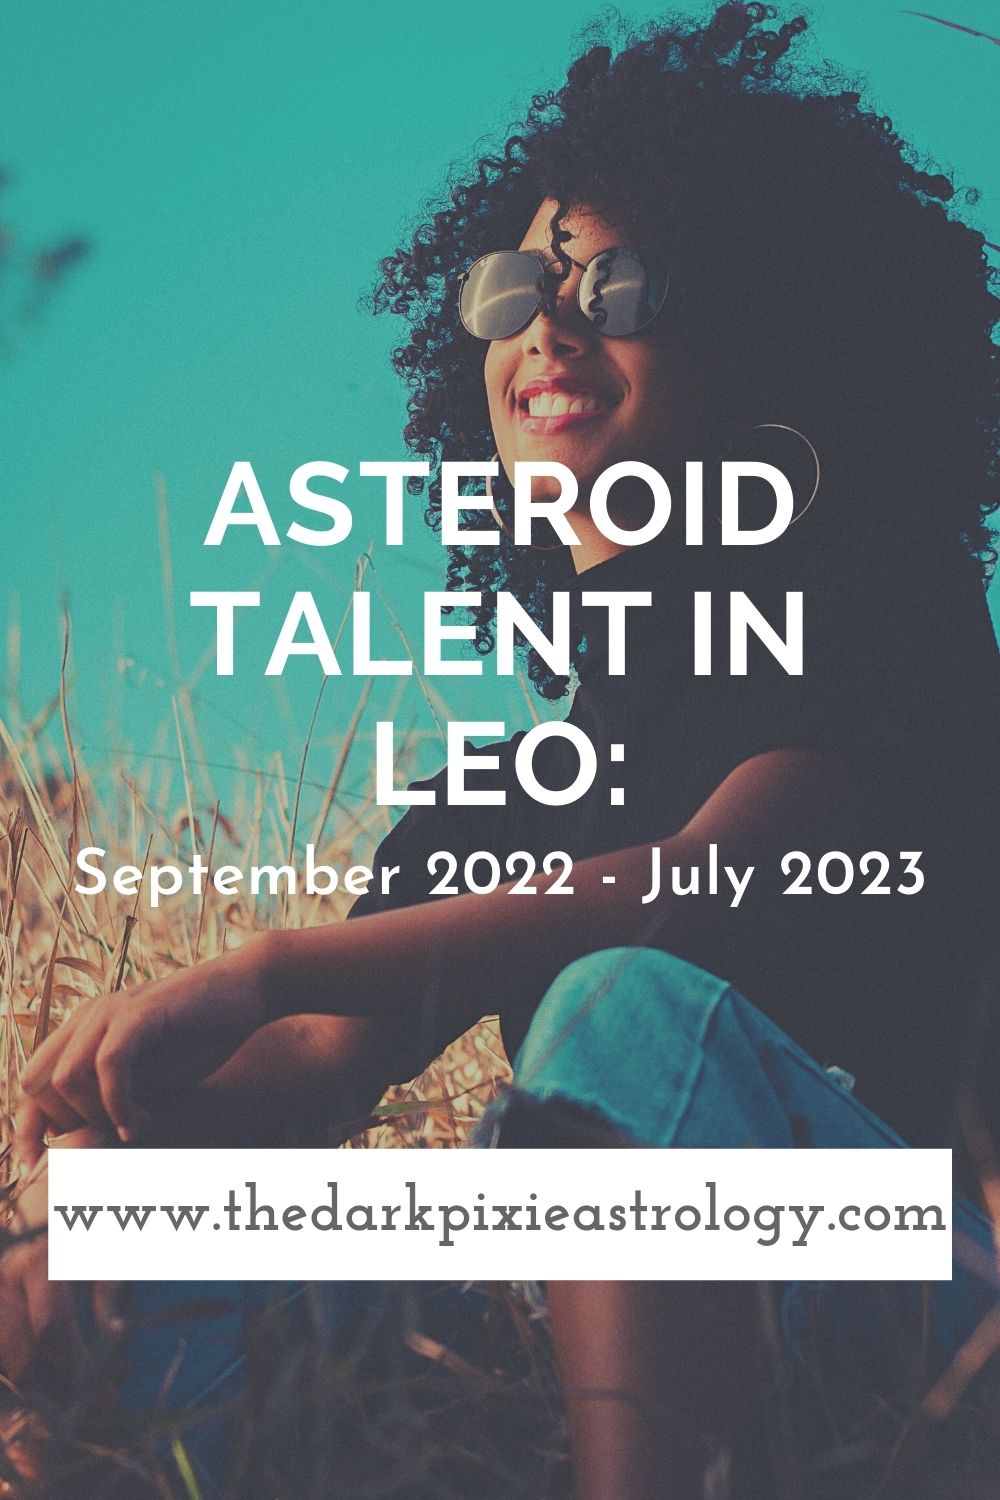 Asteroid Talent in Leo: September 2022 - July 2023 - The Dark Pixie Astrology